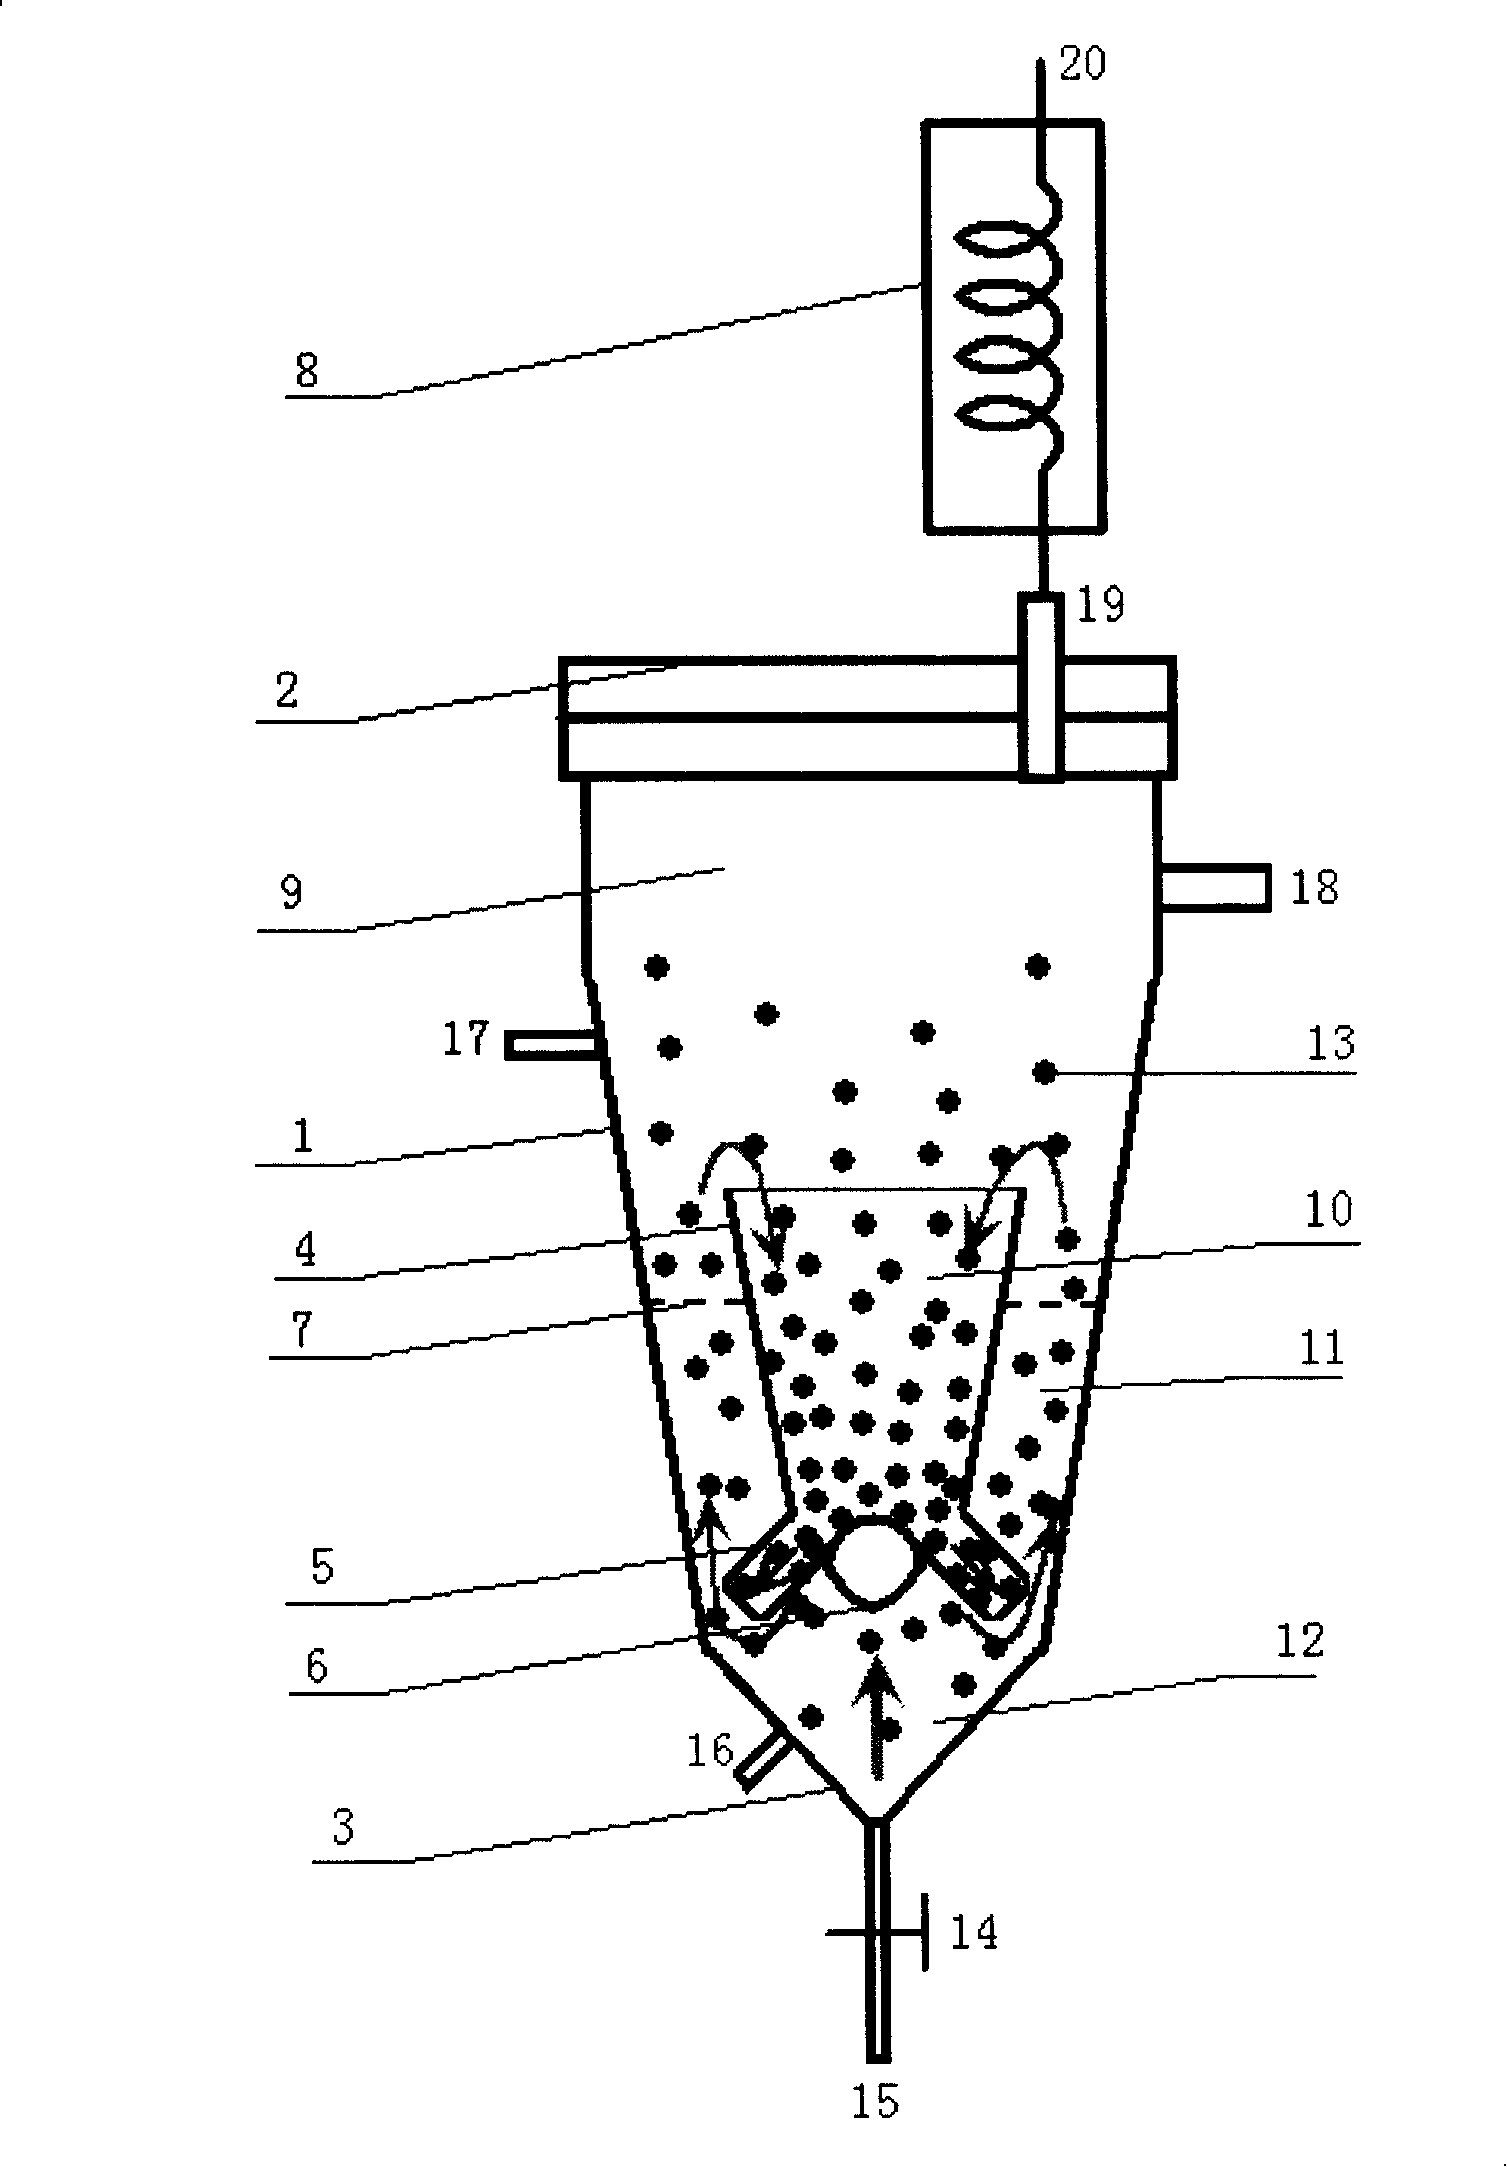 Fixation cell (or enzyme) internal circulation fluidized bed reactor and application thereof in organic phase biological catalysis